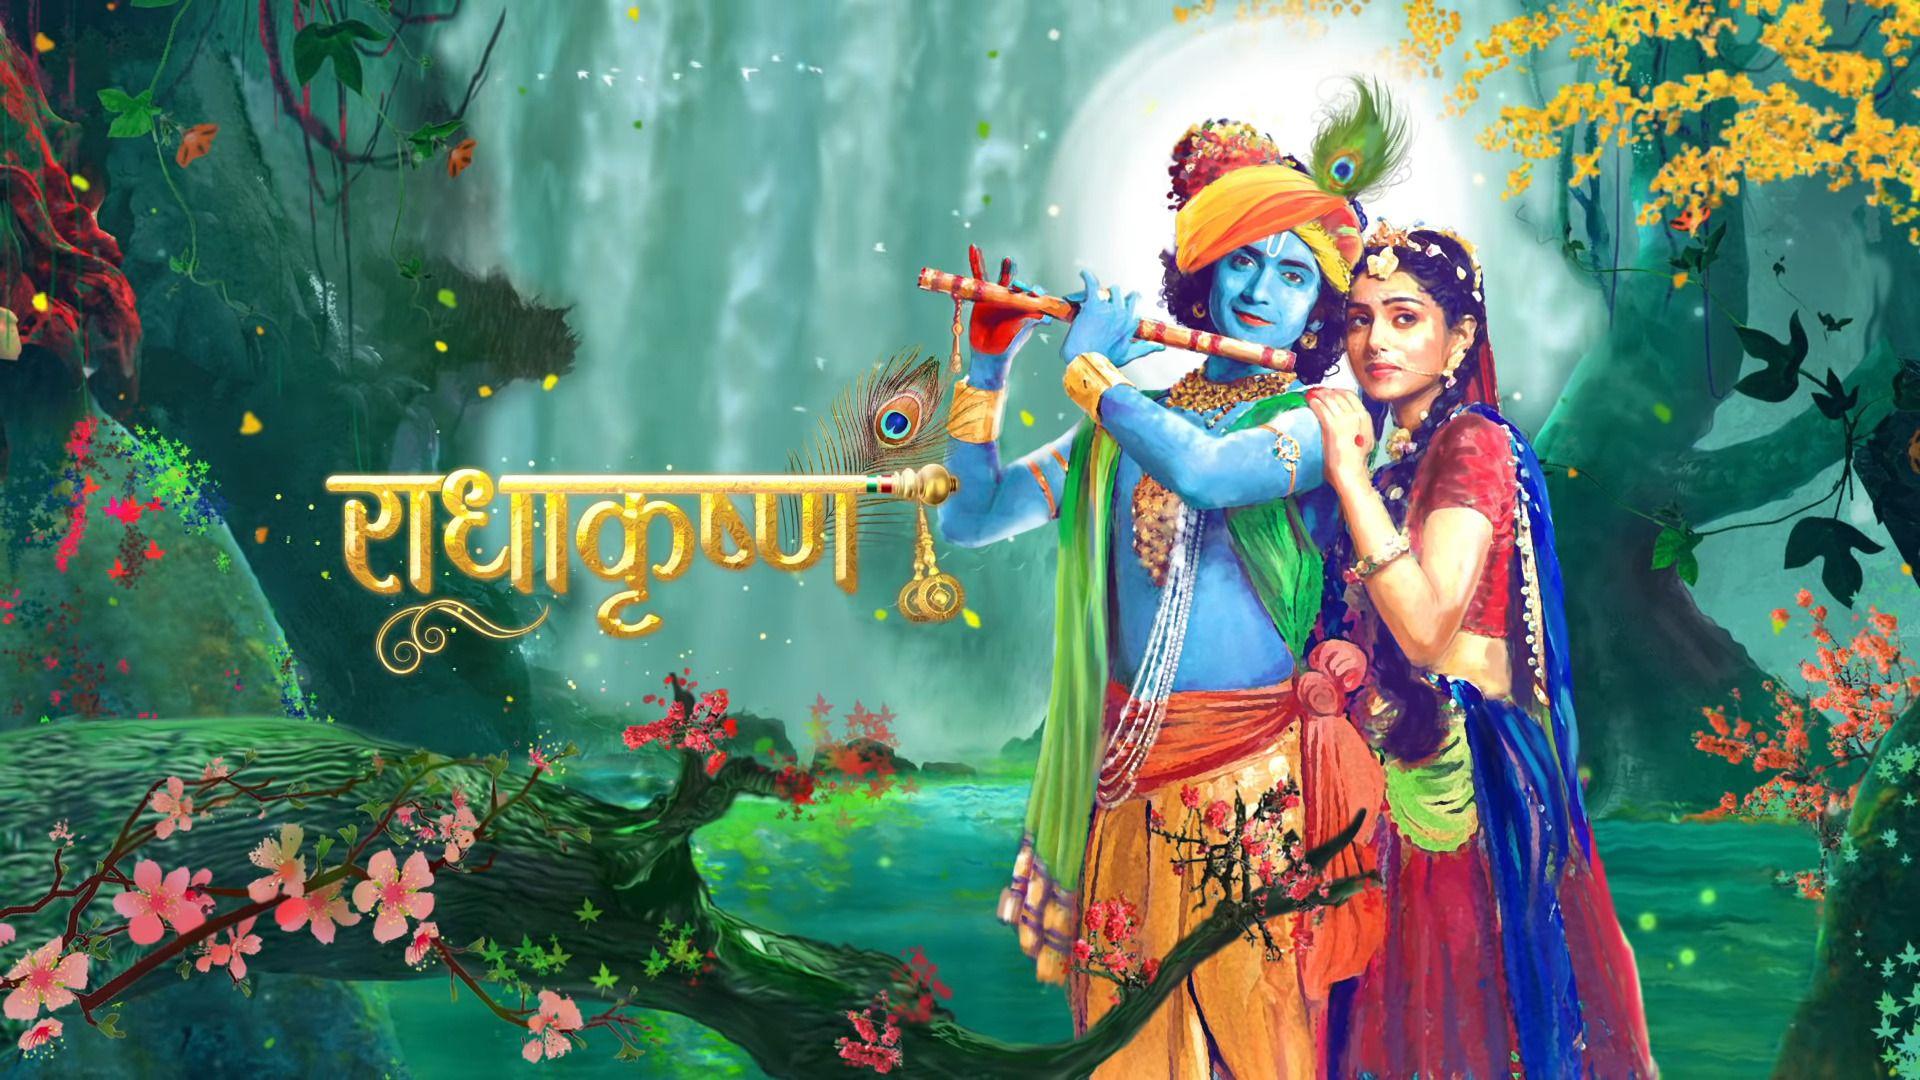 Lord Krishna Hd Wallpapers 1920X1080 For Desktop Download : Over 40,000